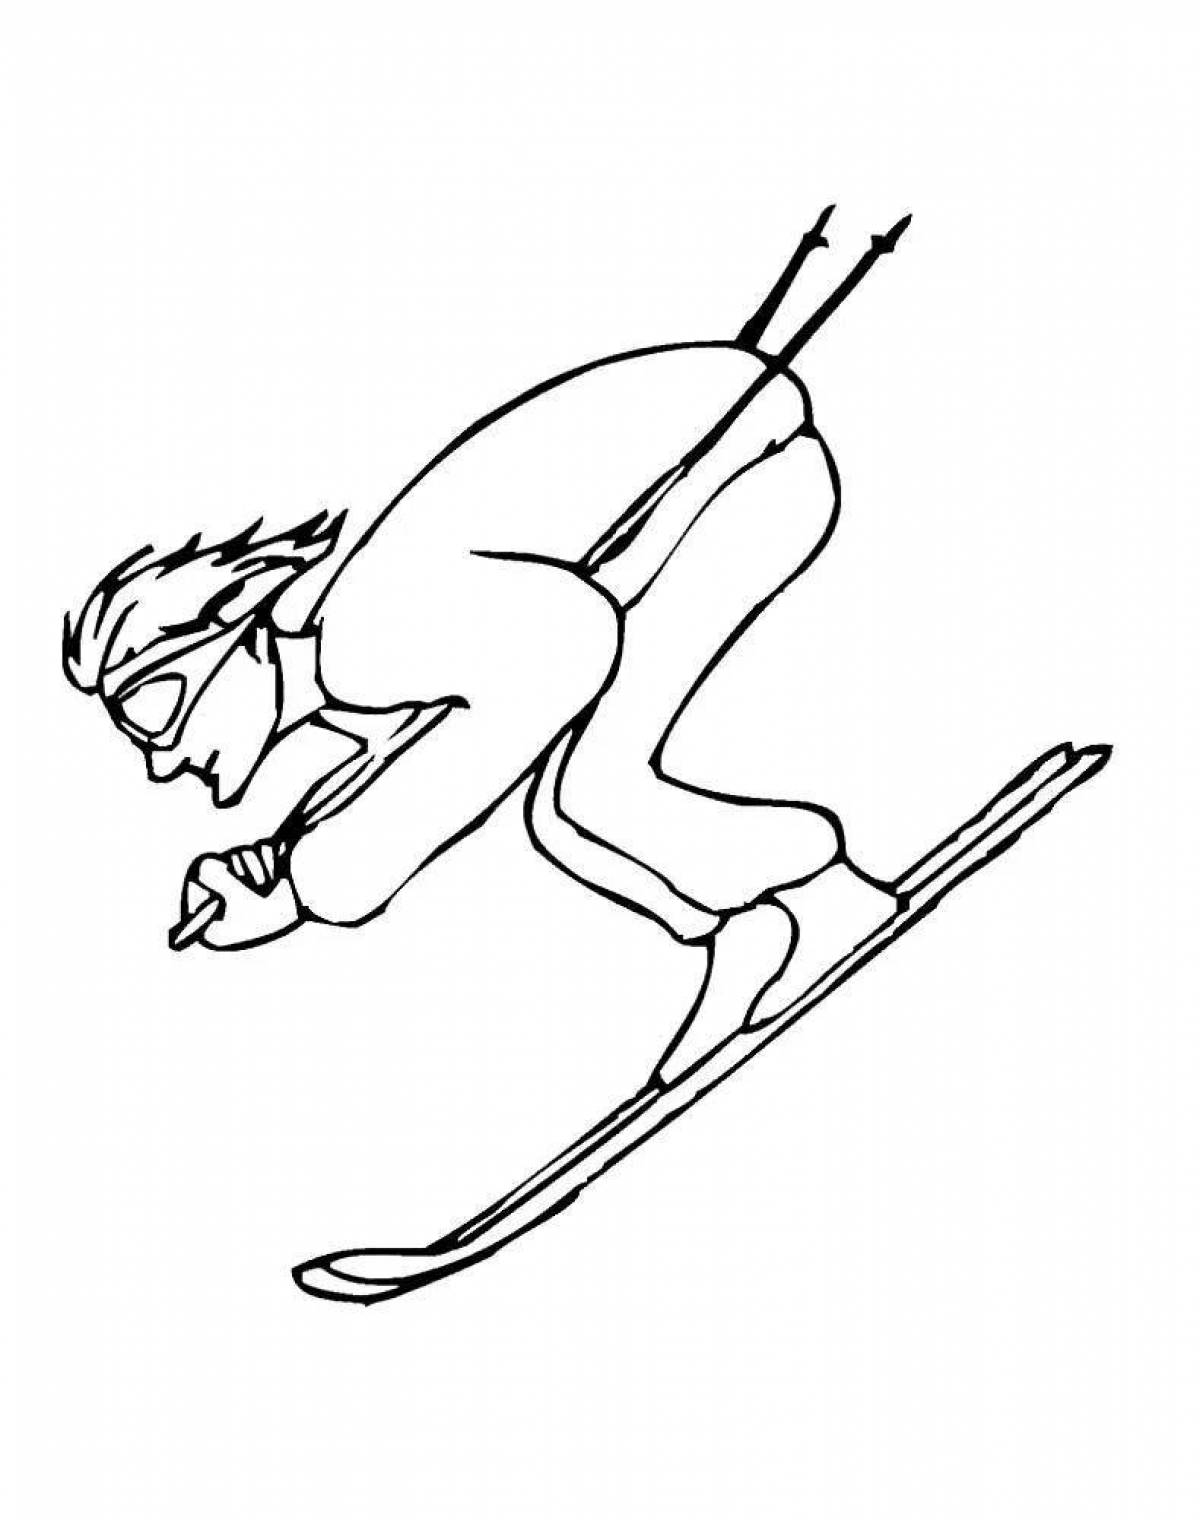 Coloring page graceful skier